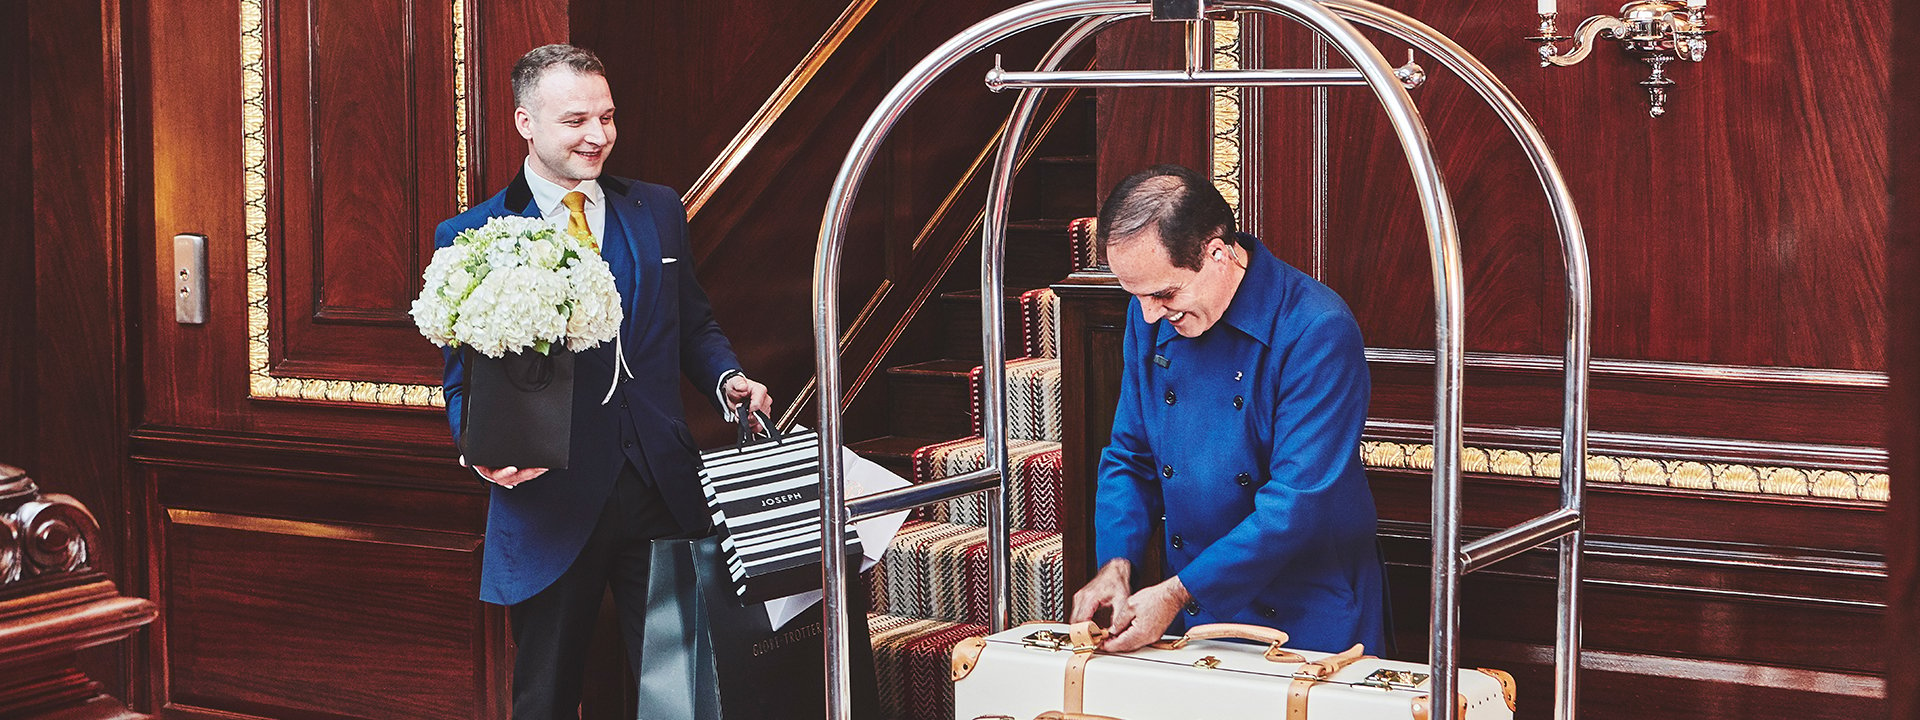 The concierge team, one man handling the luggage and the other is holding a bouquet of flowers.